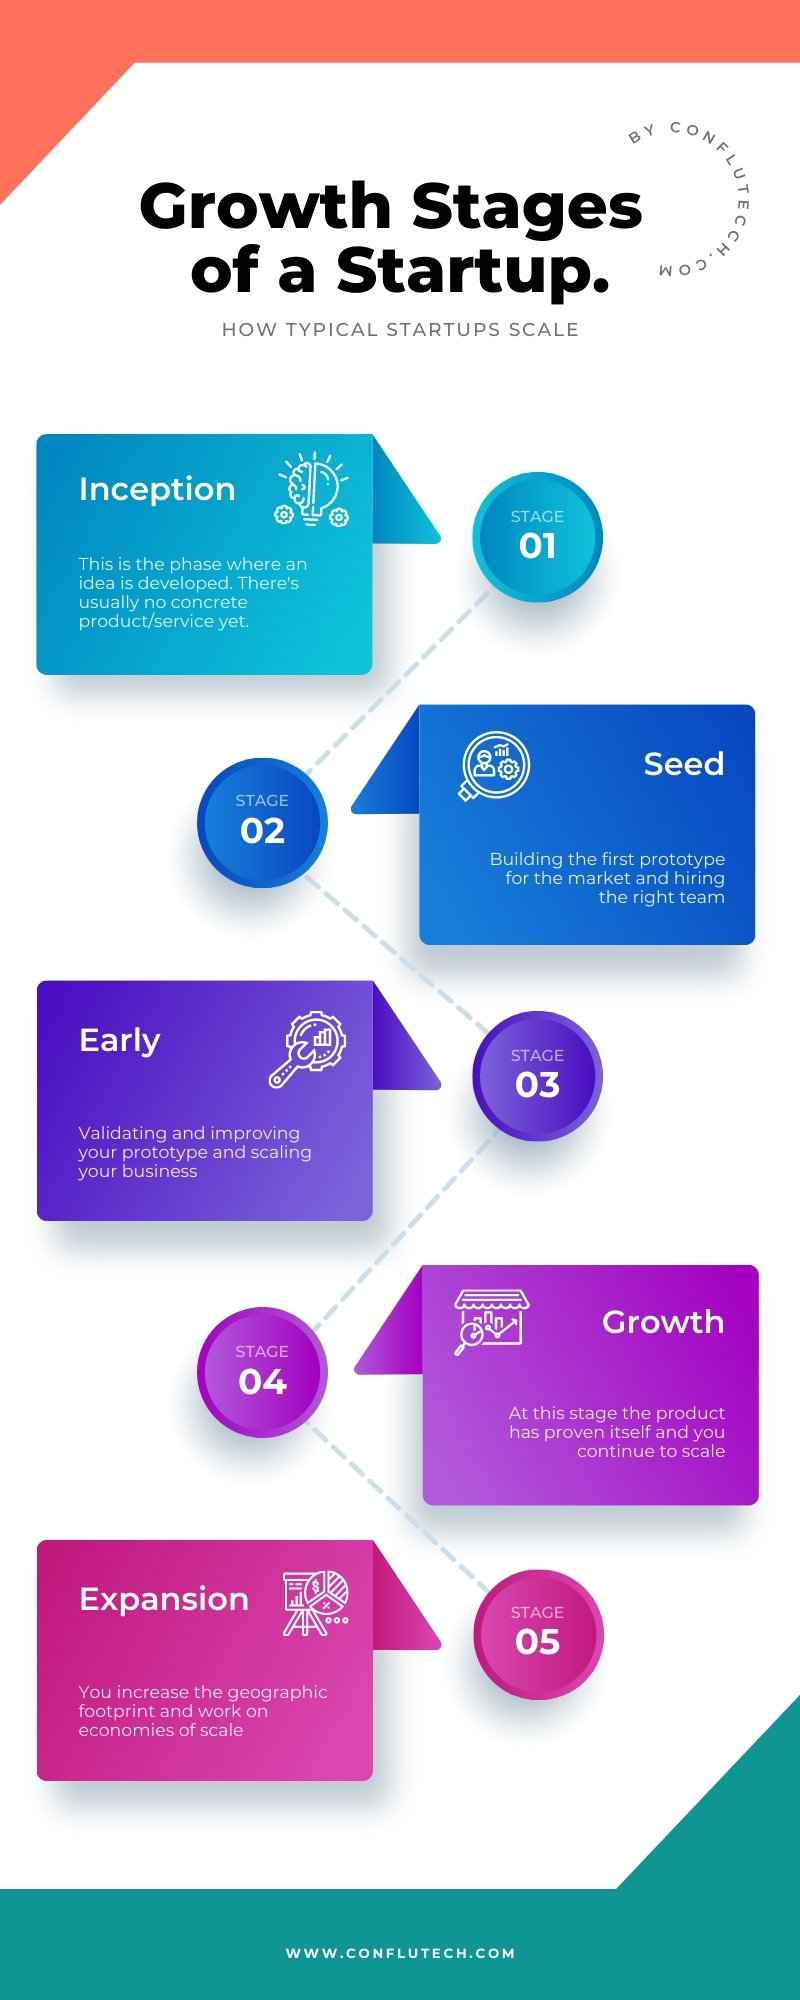 Growth Stages of a Startup